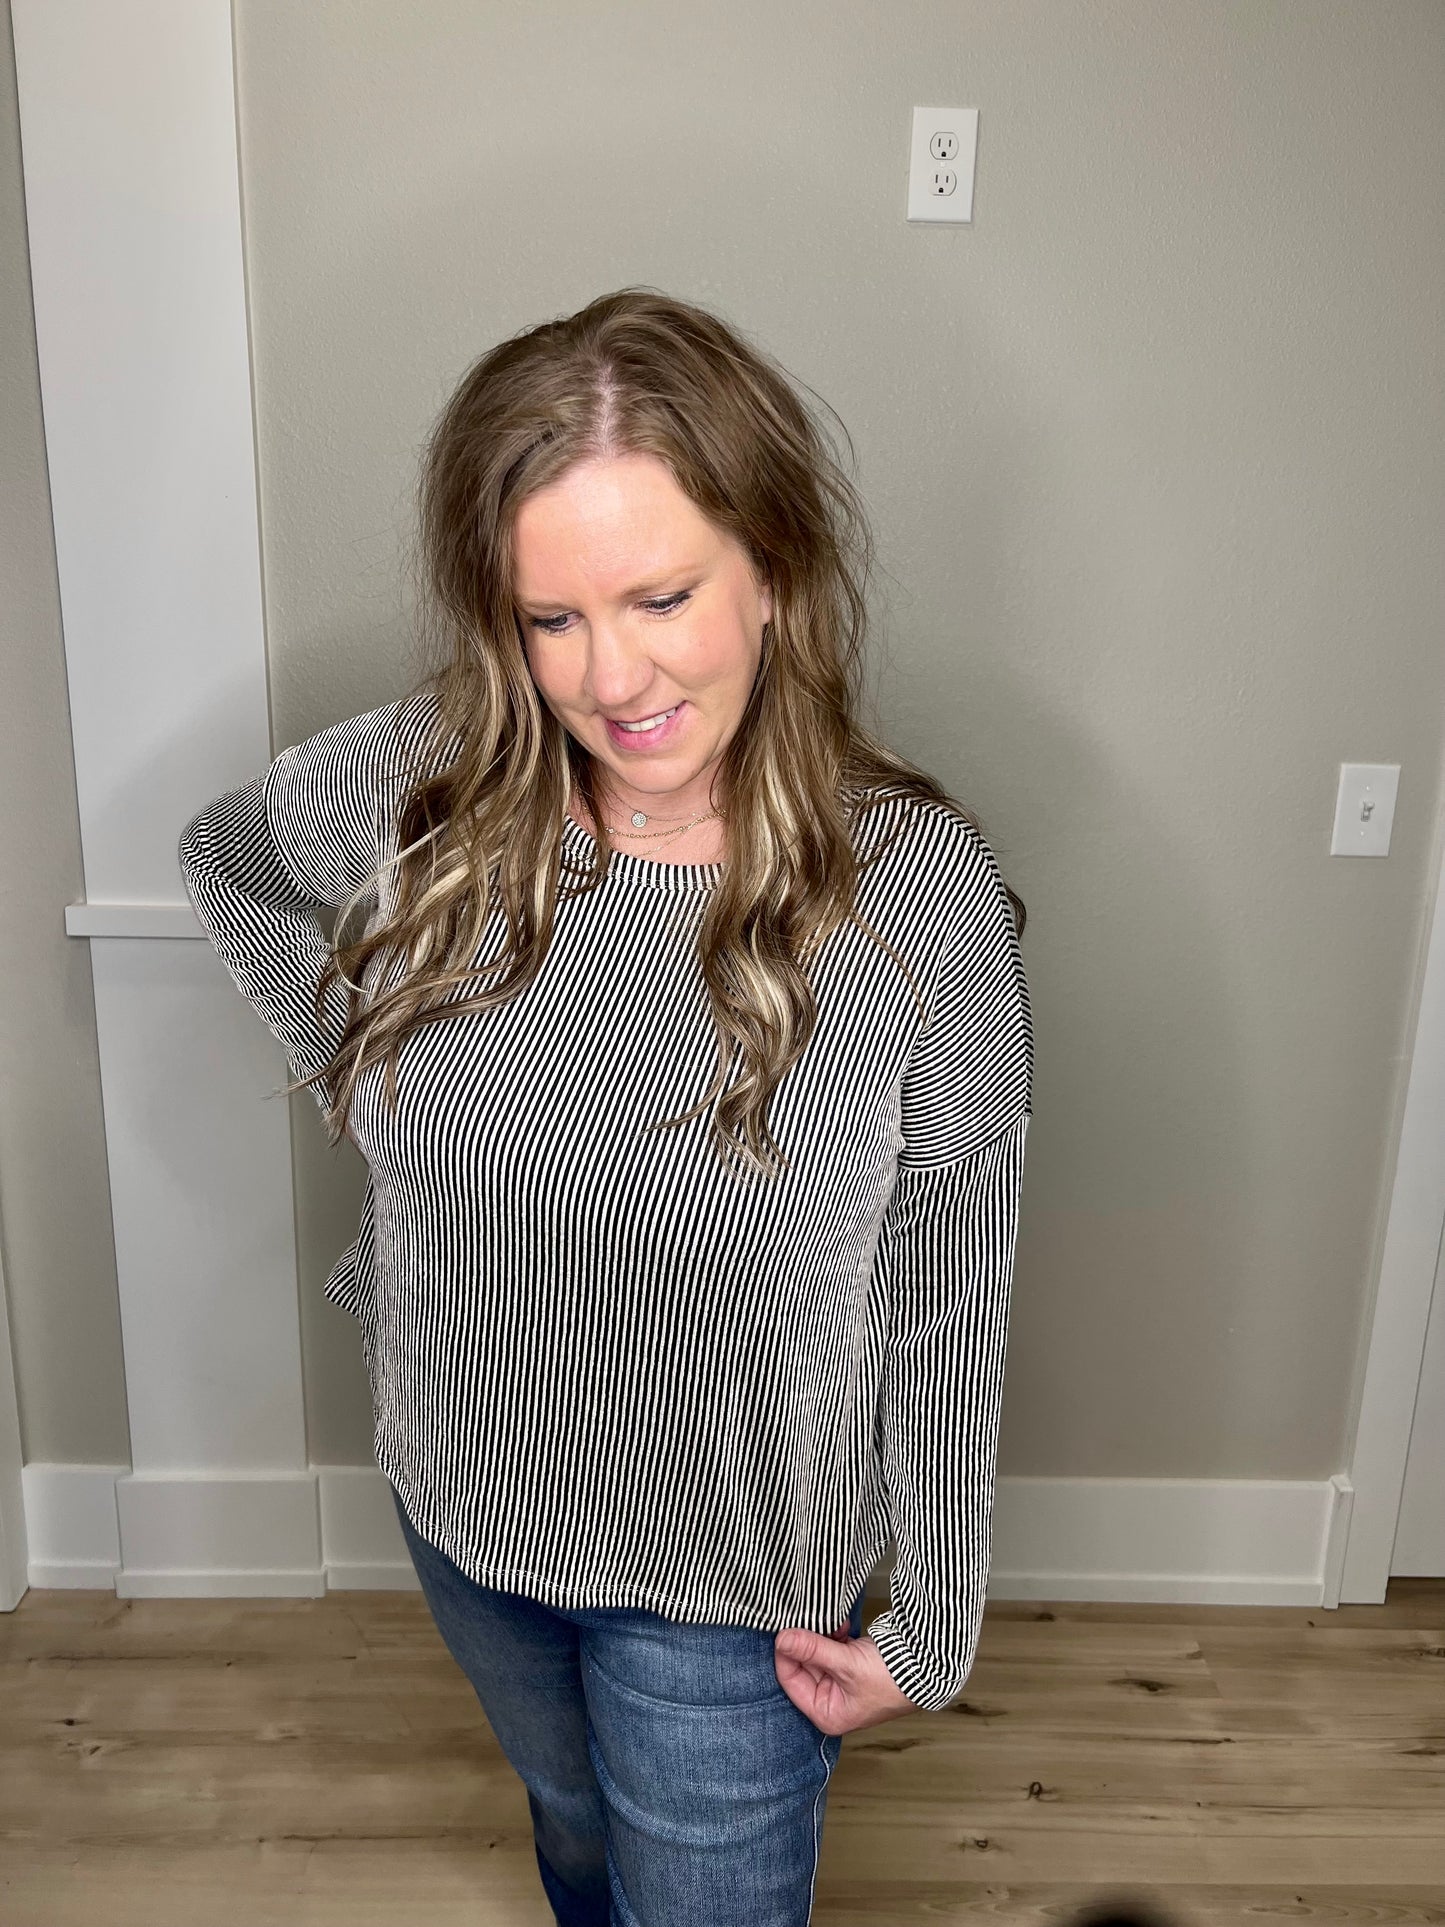 Revel Ribbed Top